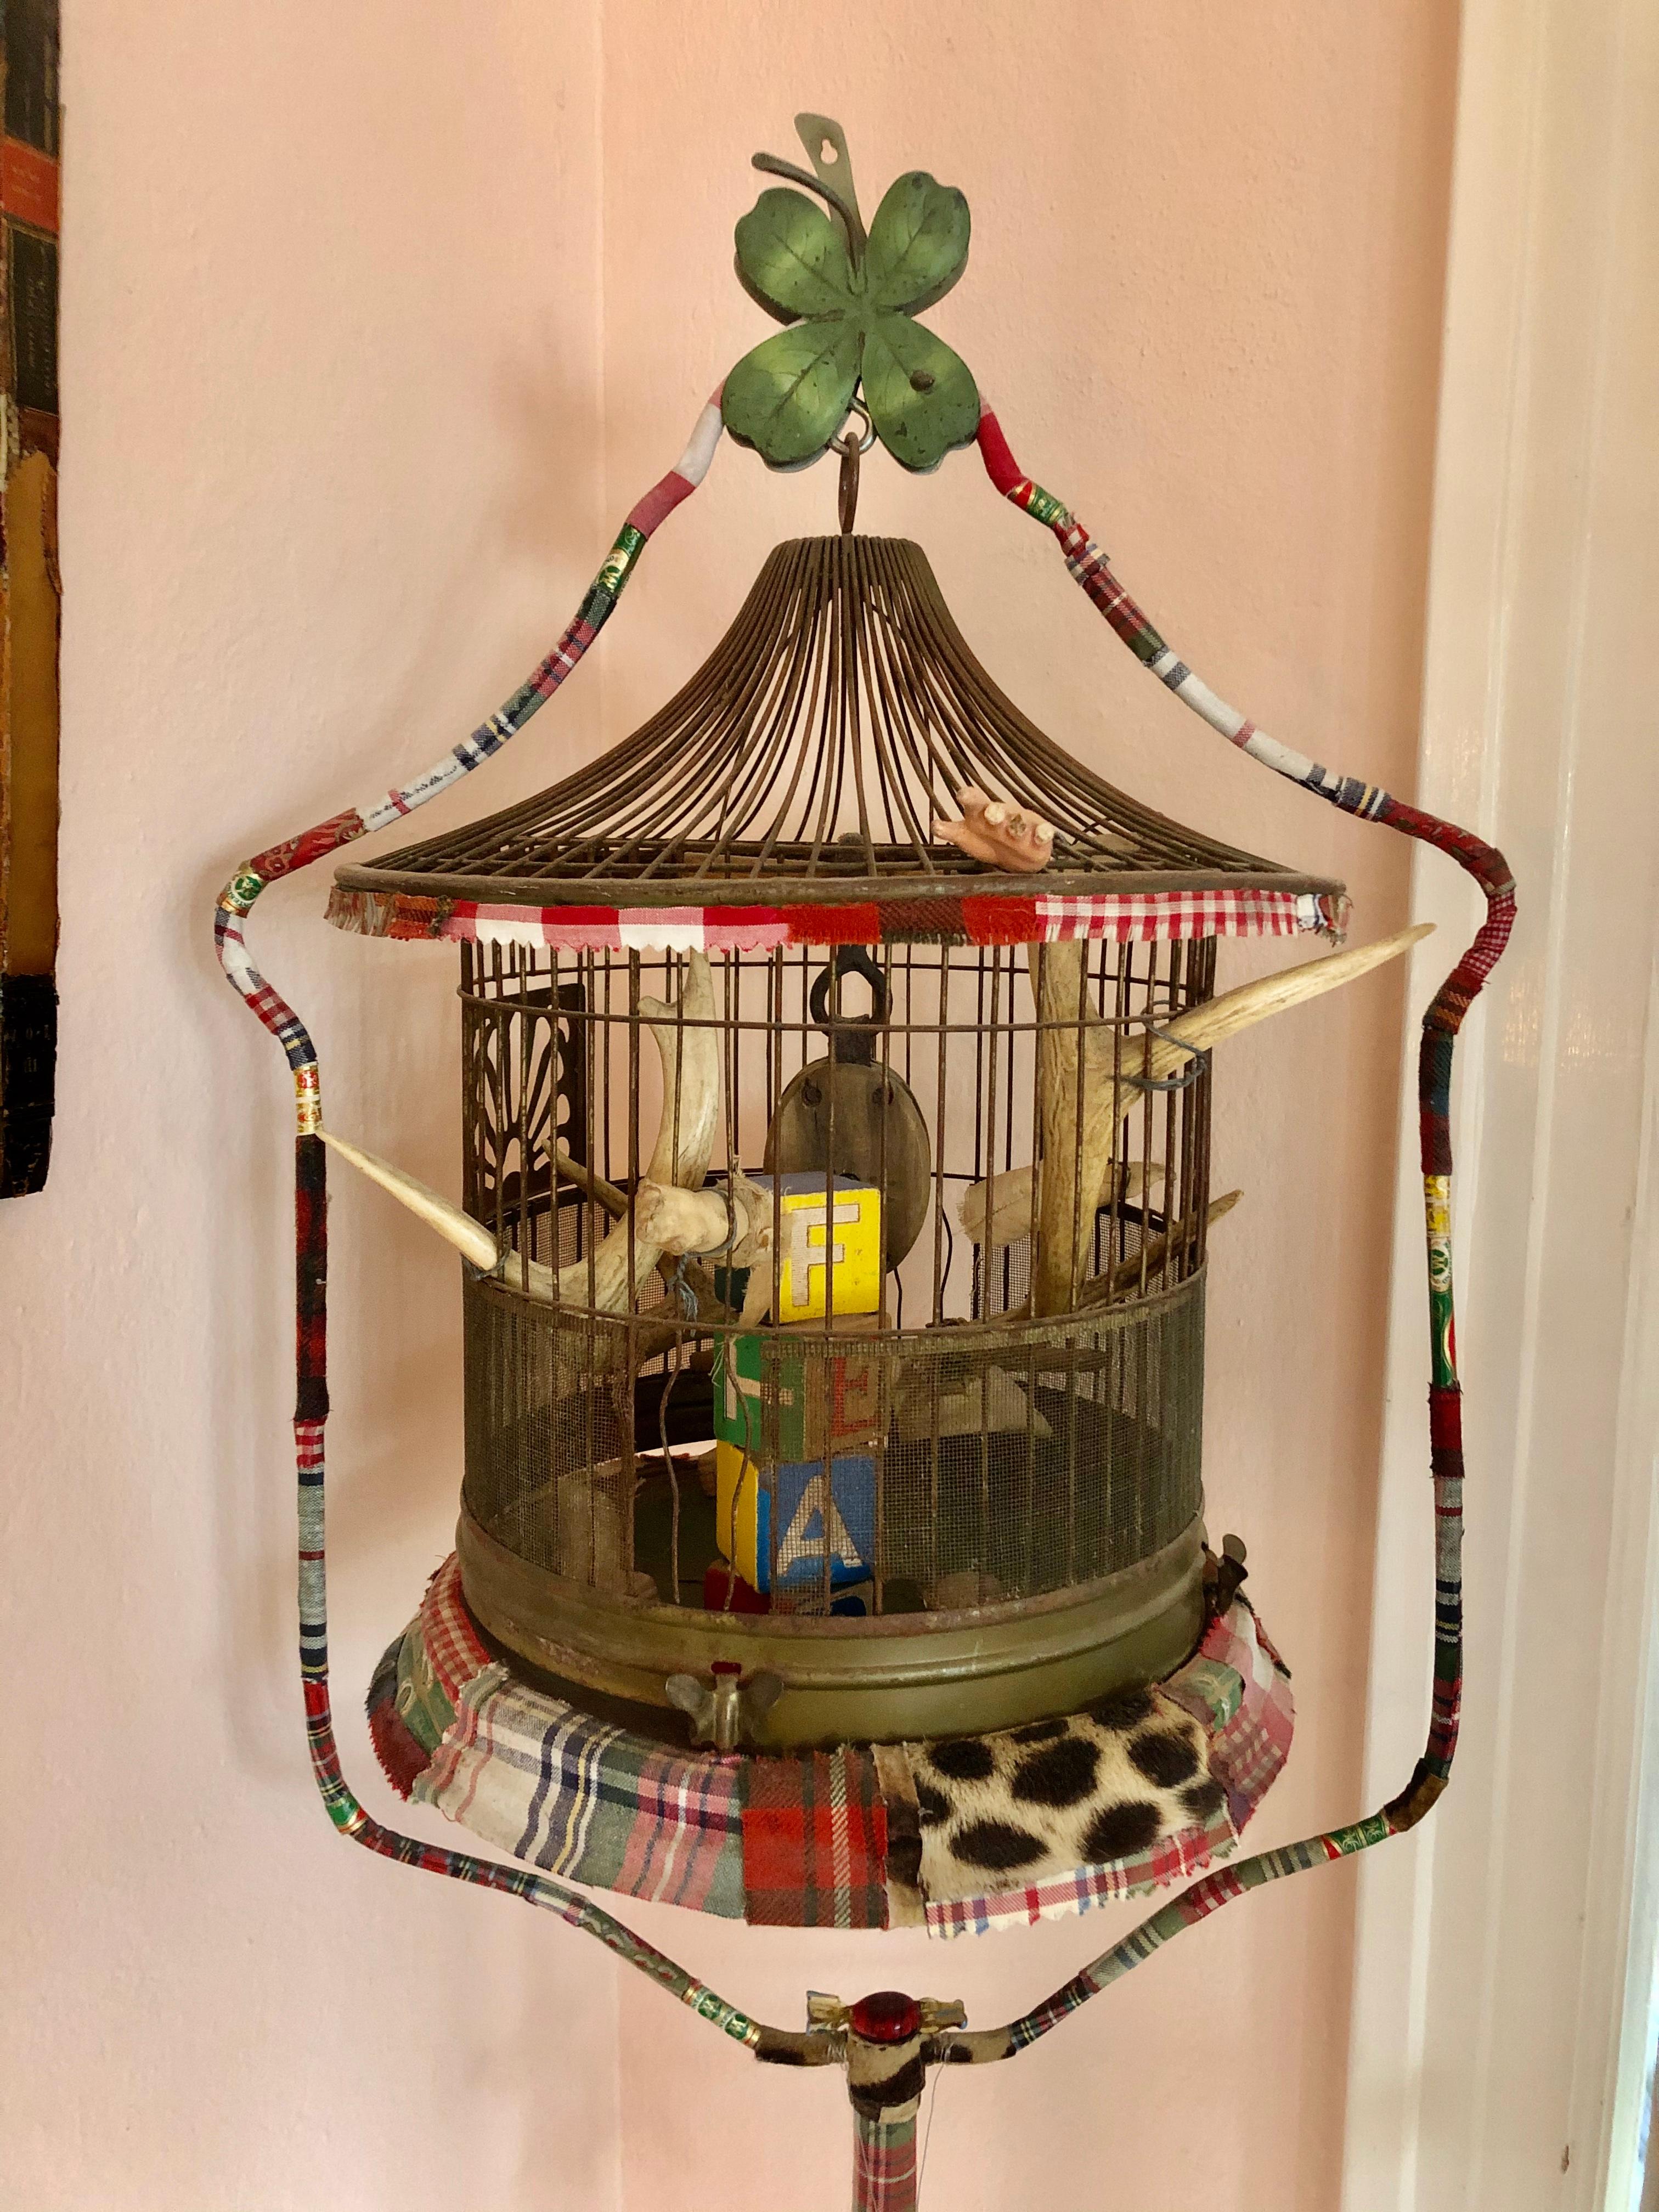 A beautiful and thoughtful found object sculpture titled Cage of Fear made from a vintage birdcage collaged with gingham, leopard fabric and cigar box wrappings. Inside the cage is a 3 dimensional arrangement of mixed-media objects including